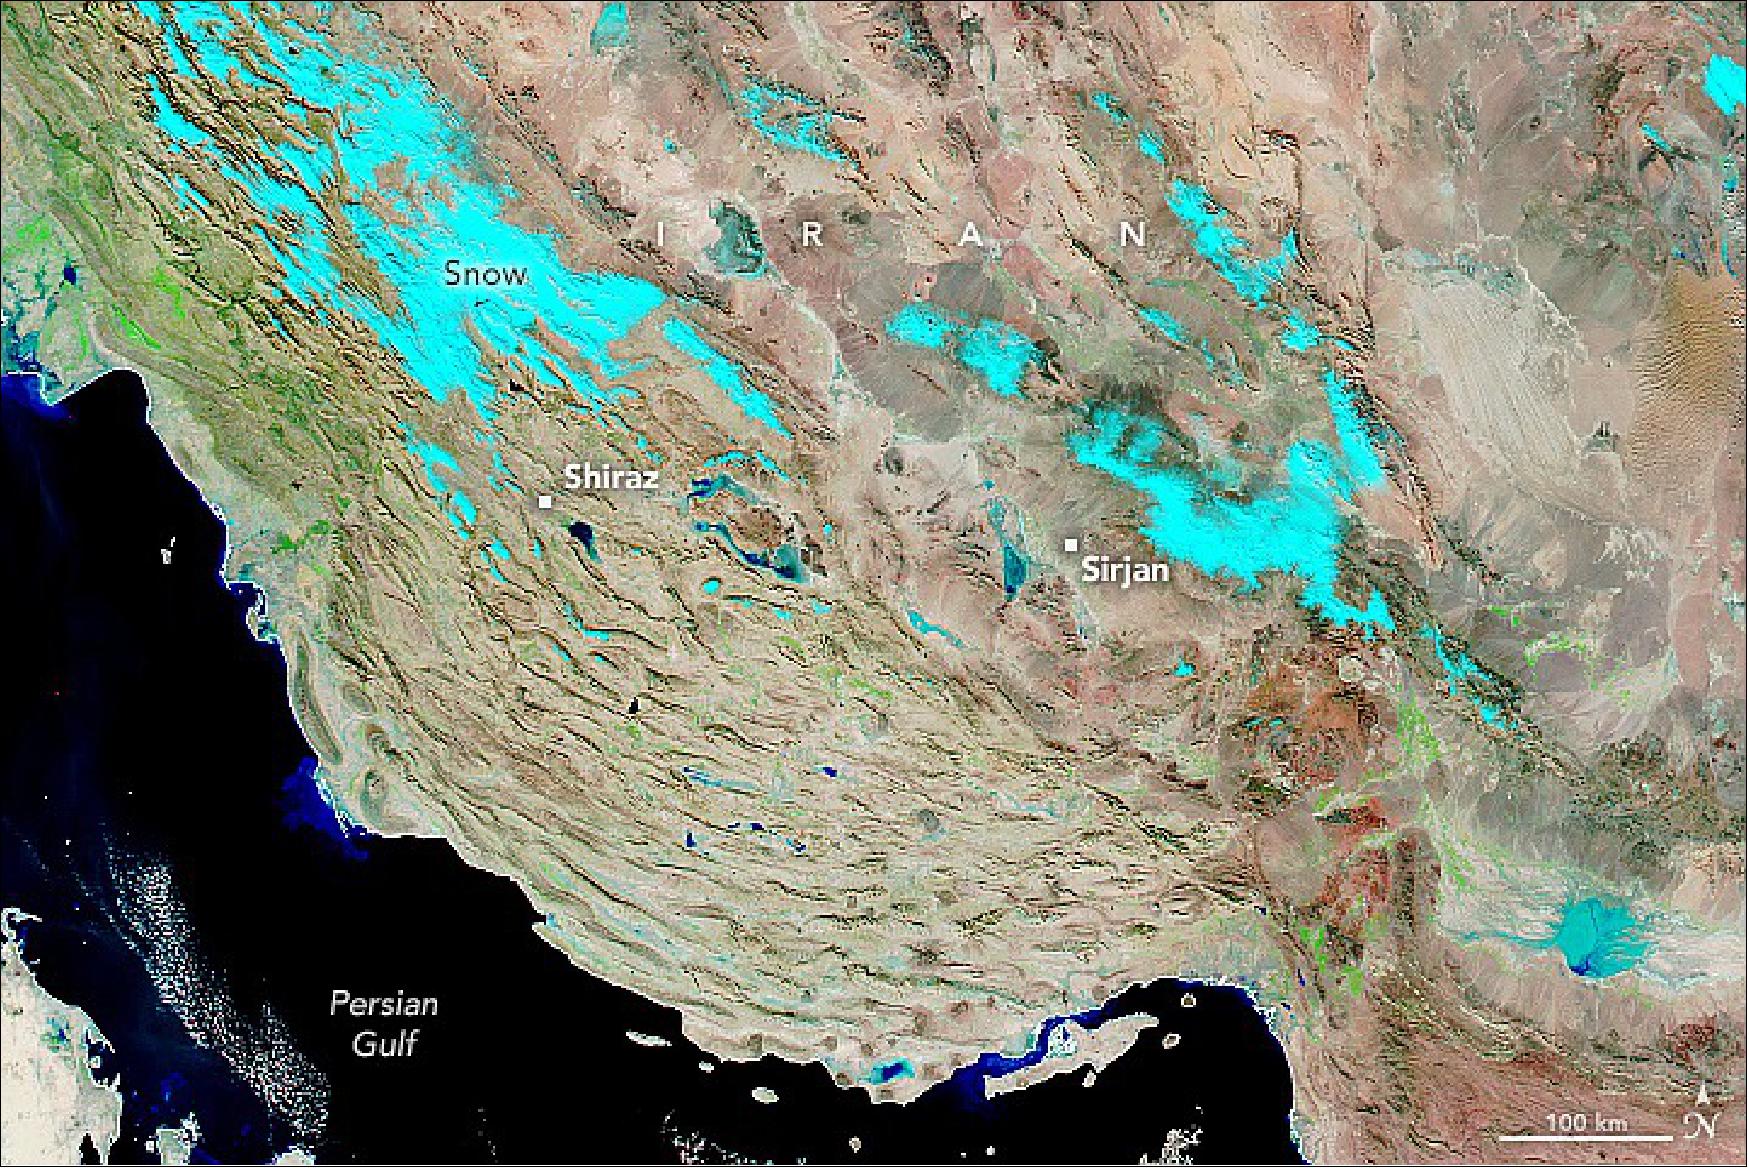 Figure 44: The MODIS instrument on NASA’s Aqua satellite captured imagery of flooding in southern Iran on January 7, 2022. After months of severe drought, a burst of rain is causing problems (image credit: NASA Earth Observatory image by Lauren Dauphin, using MODIS data from NASA EOSDIS LANCE and GIBS/Worldview. Story by Adam Voiland)